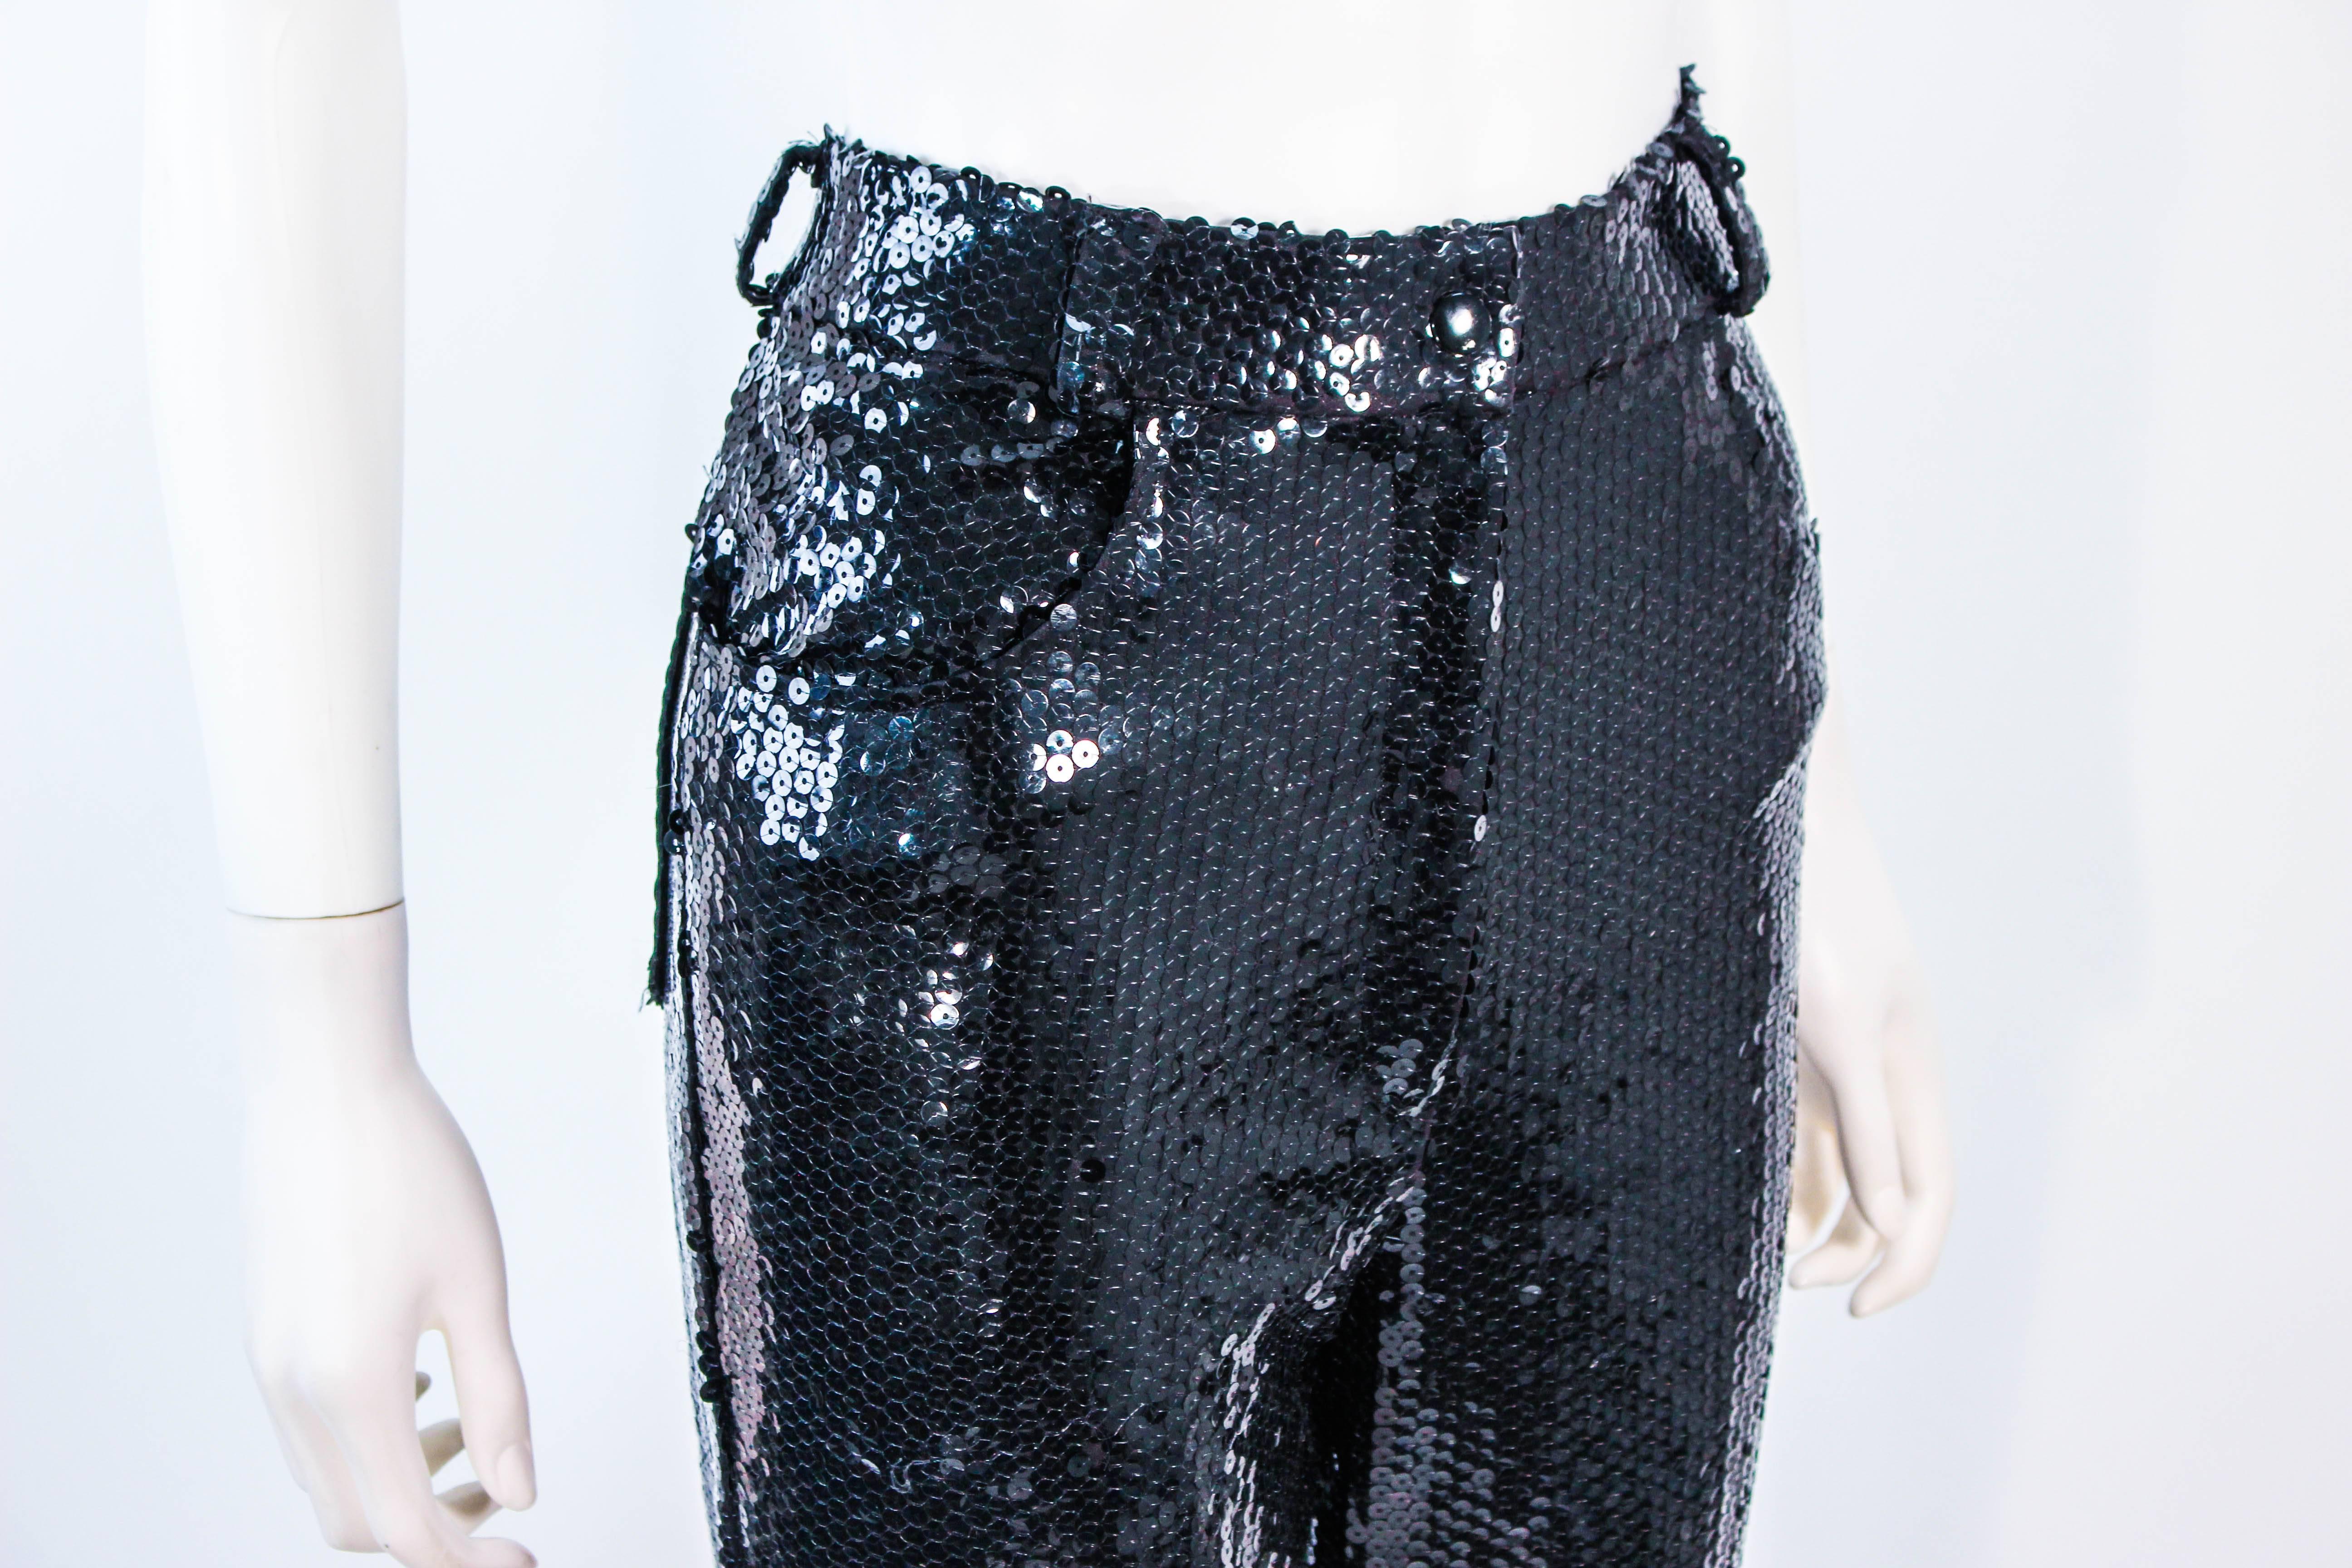 SUITE 101 Vintage Black Stretch High Waist Sequin Pants Size 8 10 In Excellent Condition For Sale In Los Angeles, CA